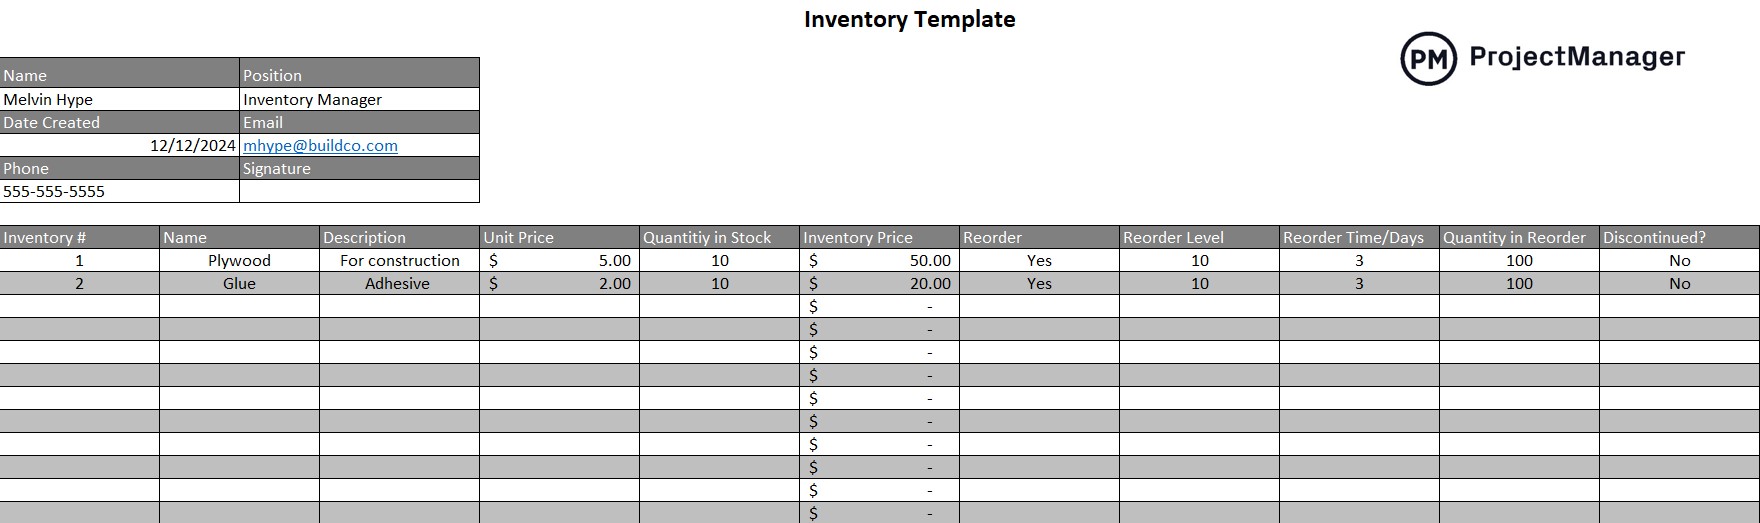 Inventory tracking template for Excel by ProjectManager